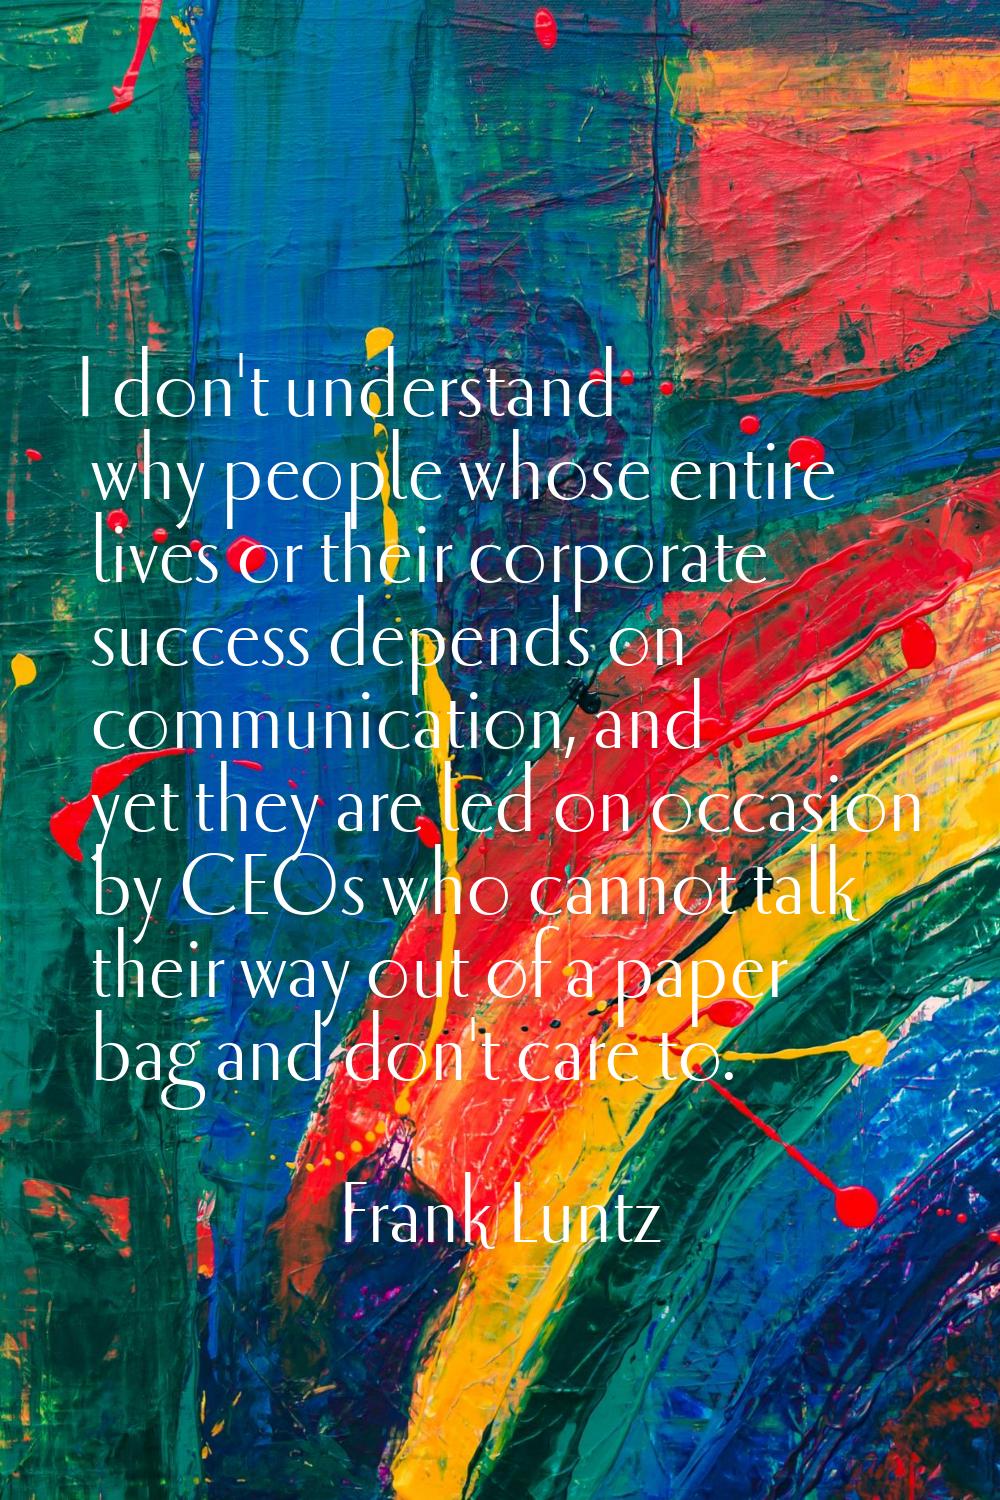 I don't understand why people whose entire lives or their corporate success depends on communicatio